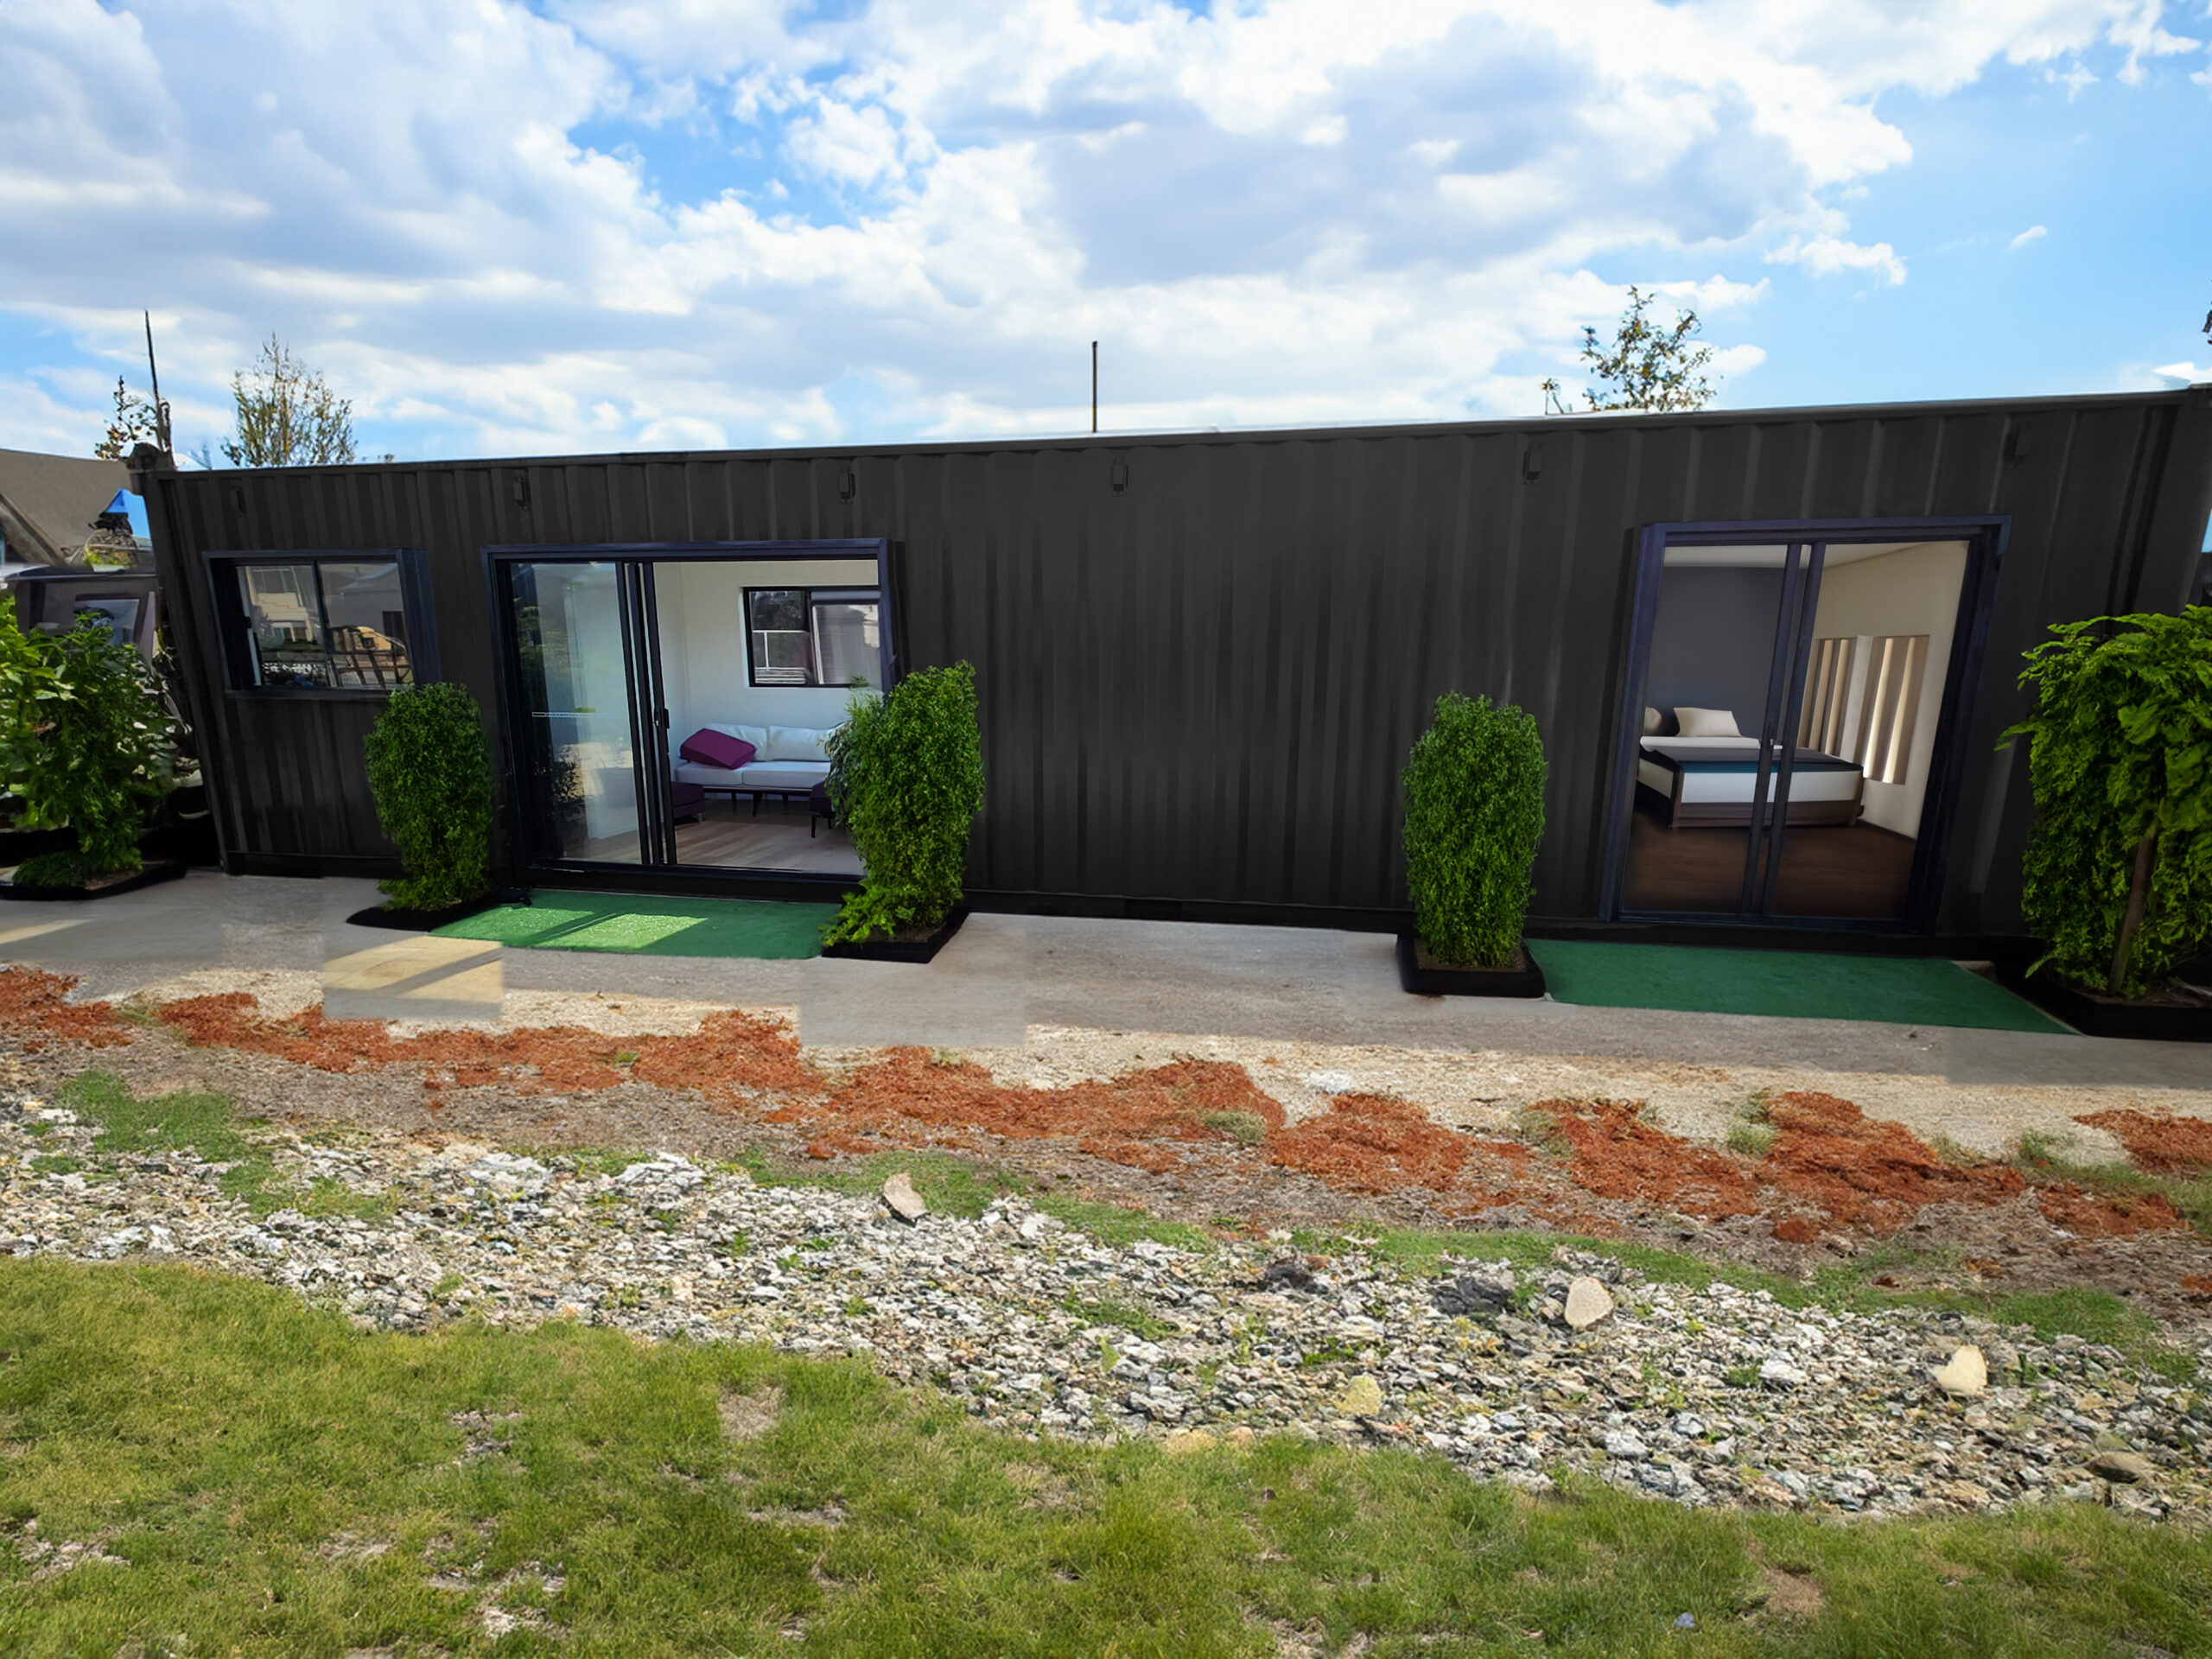 40ft 2 Bedroom Daintree container homes (10)_ Monument - 2BR